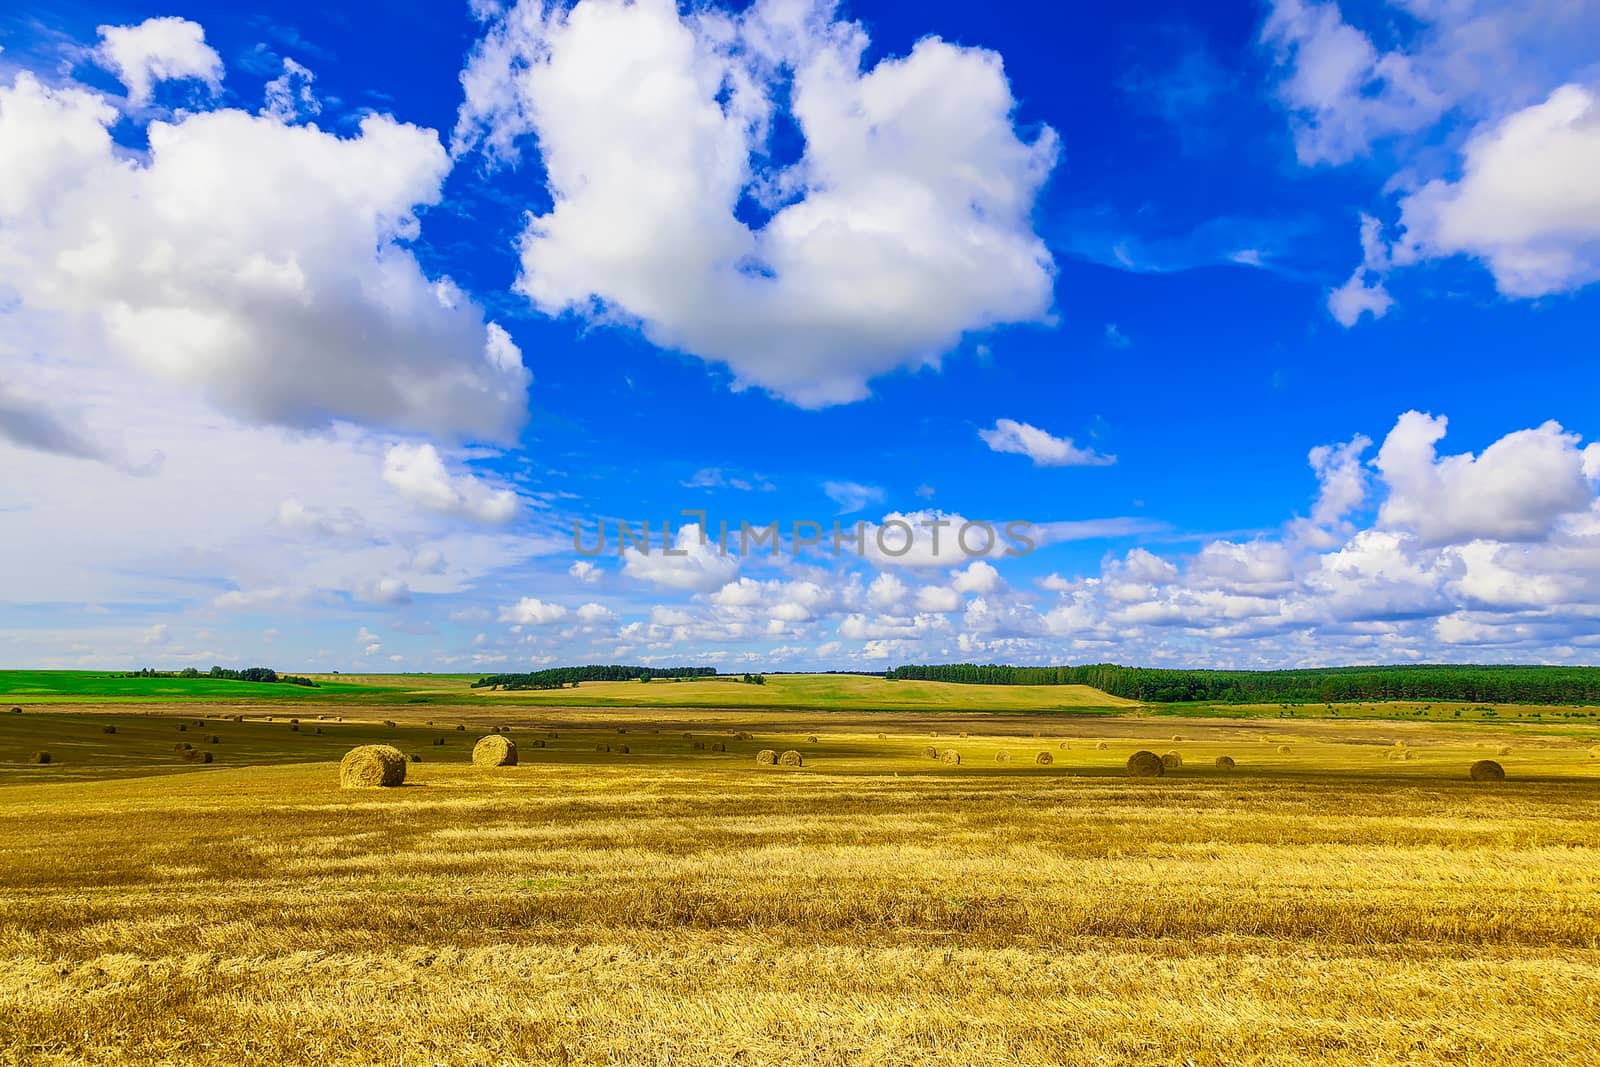 Round Straw Bales in a Stubble Field at end of Summer at Day with Blue Sky, Clouds after Harvest